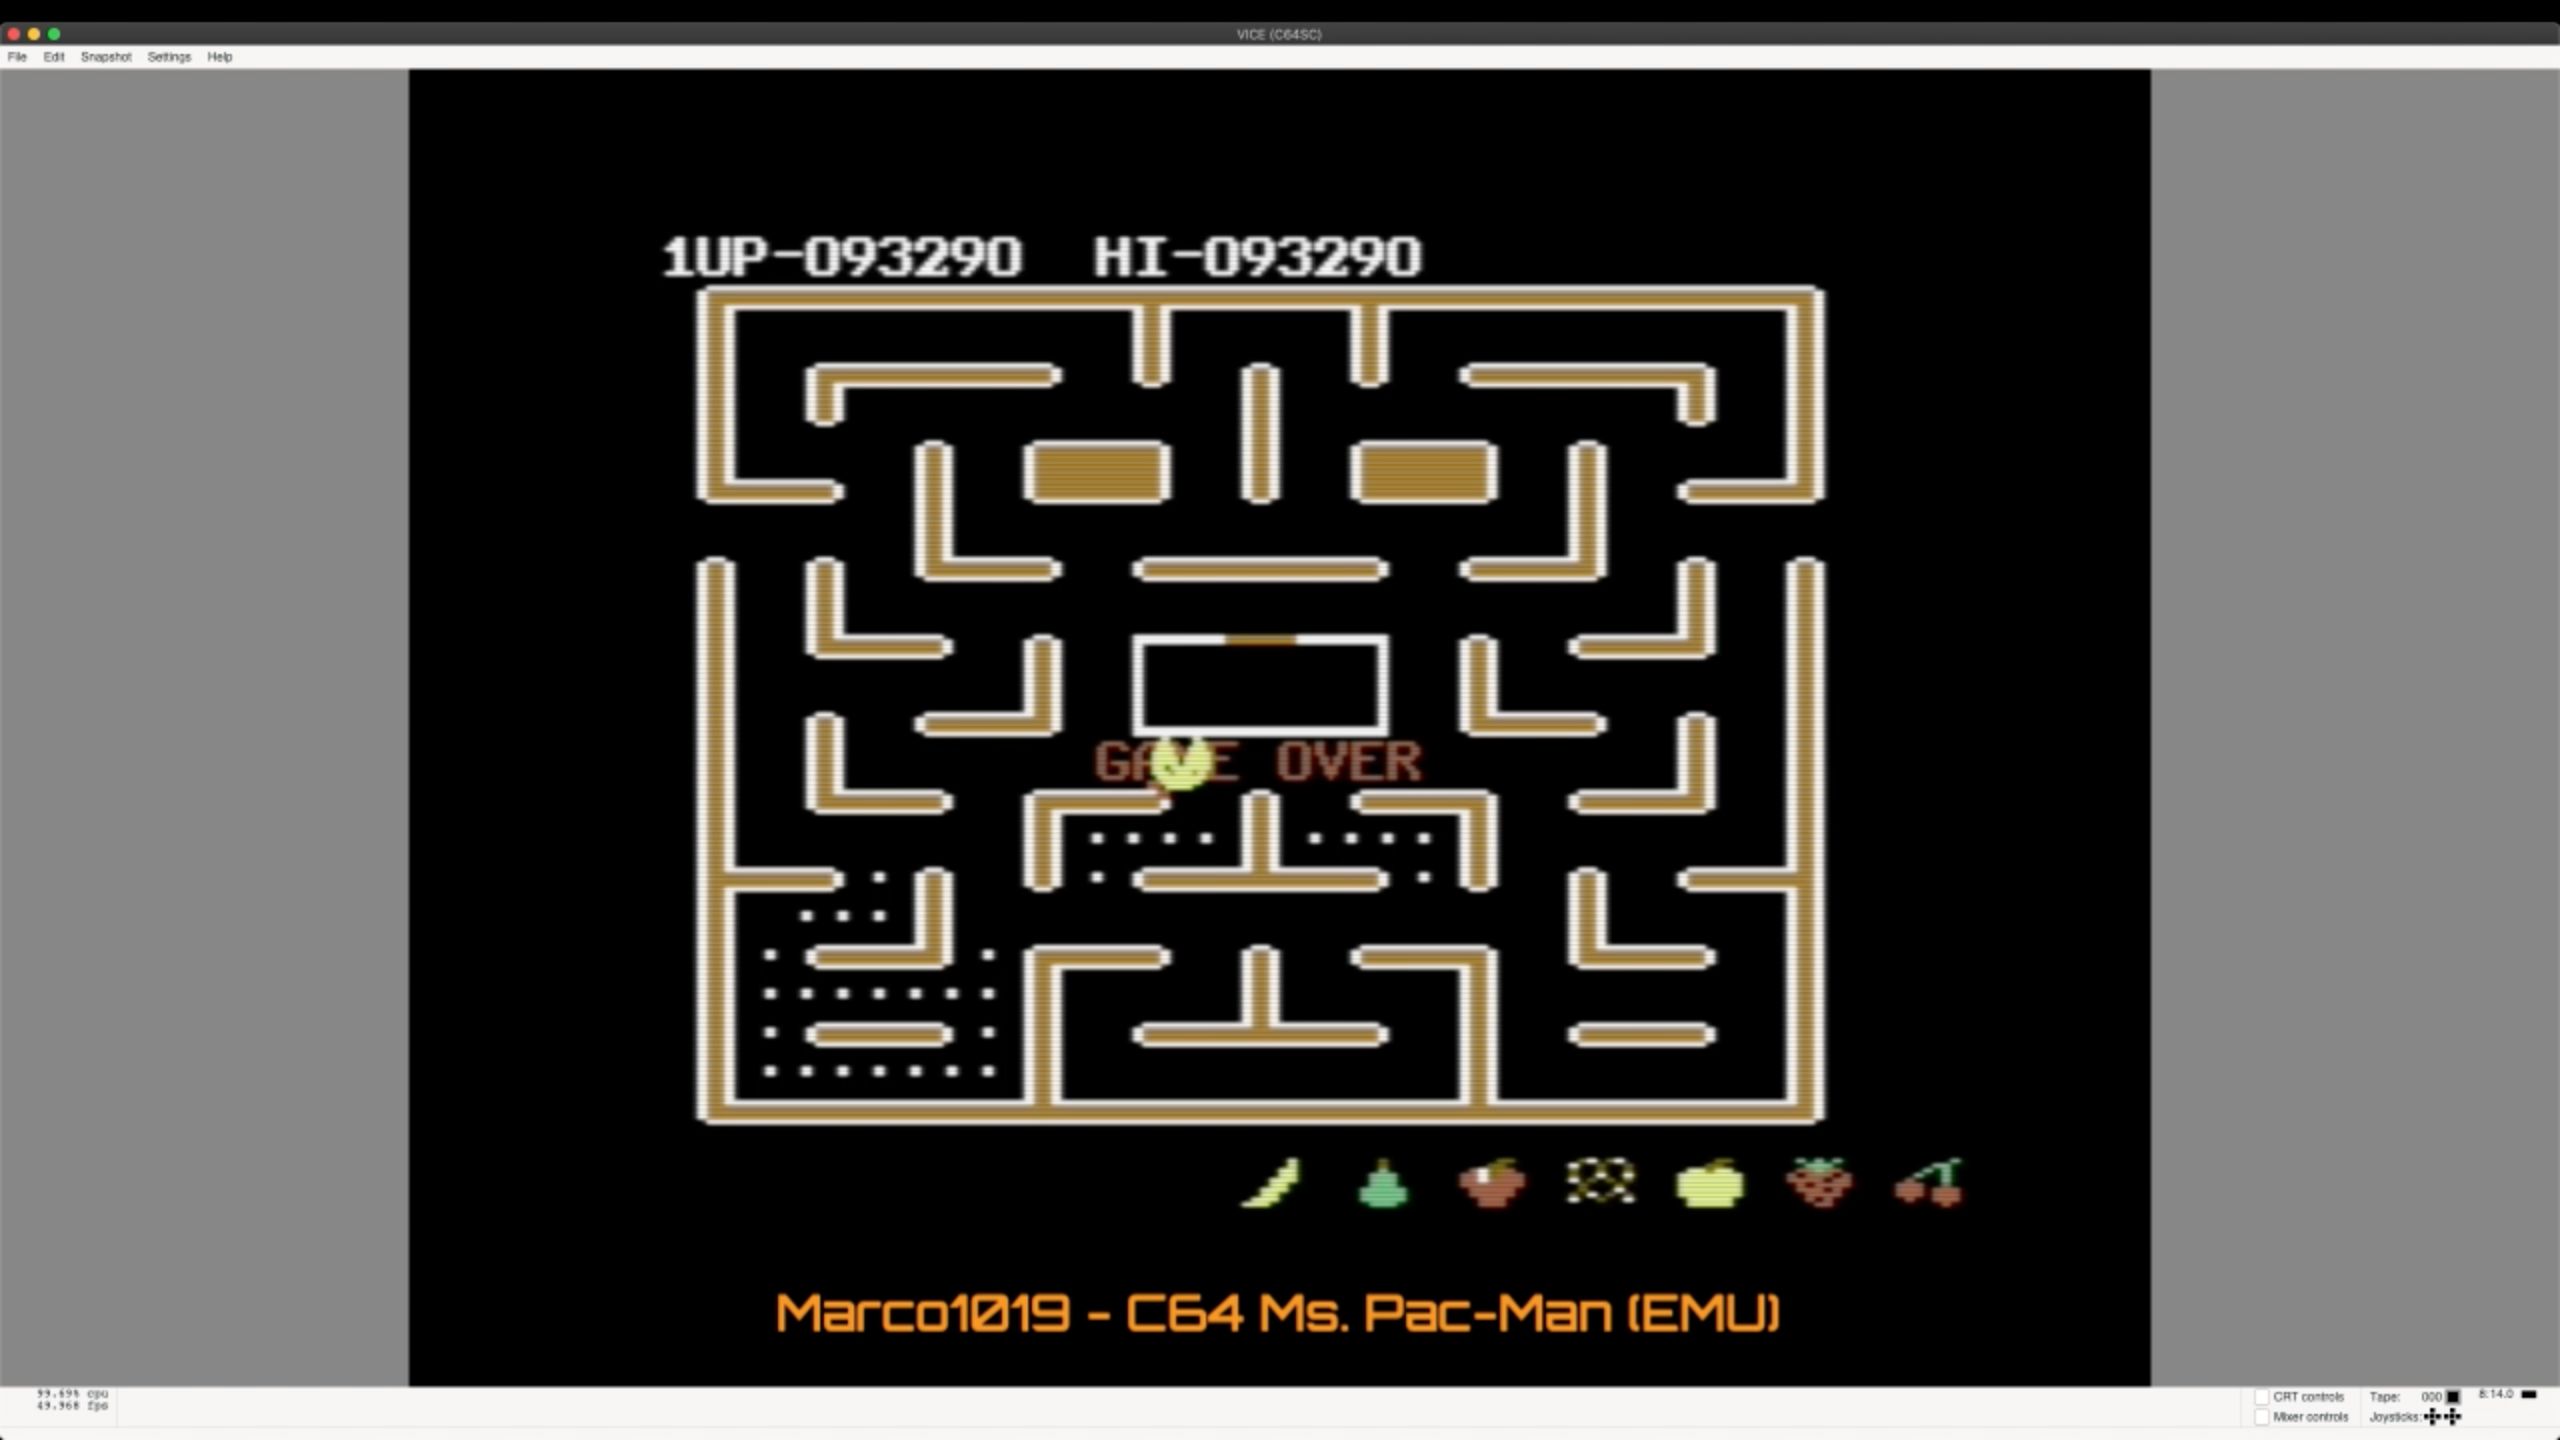 Marco1019: Ms. Pac-Man [Banana Start] (Commodore 64 Emulated) 93,290 points on 2021-02-06 16:33:46